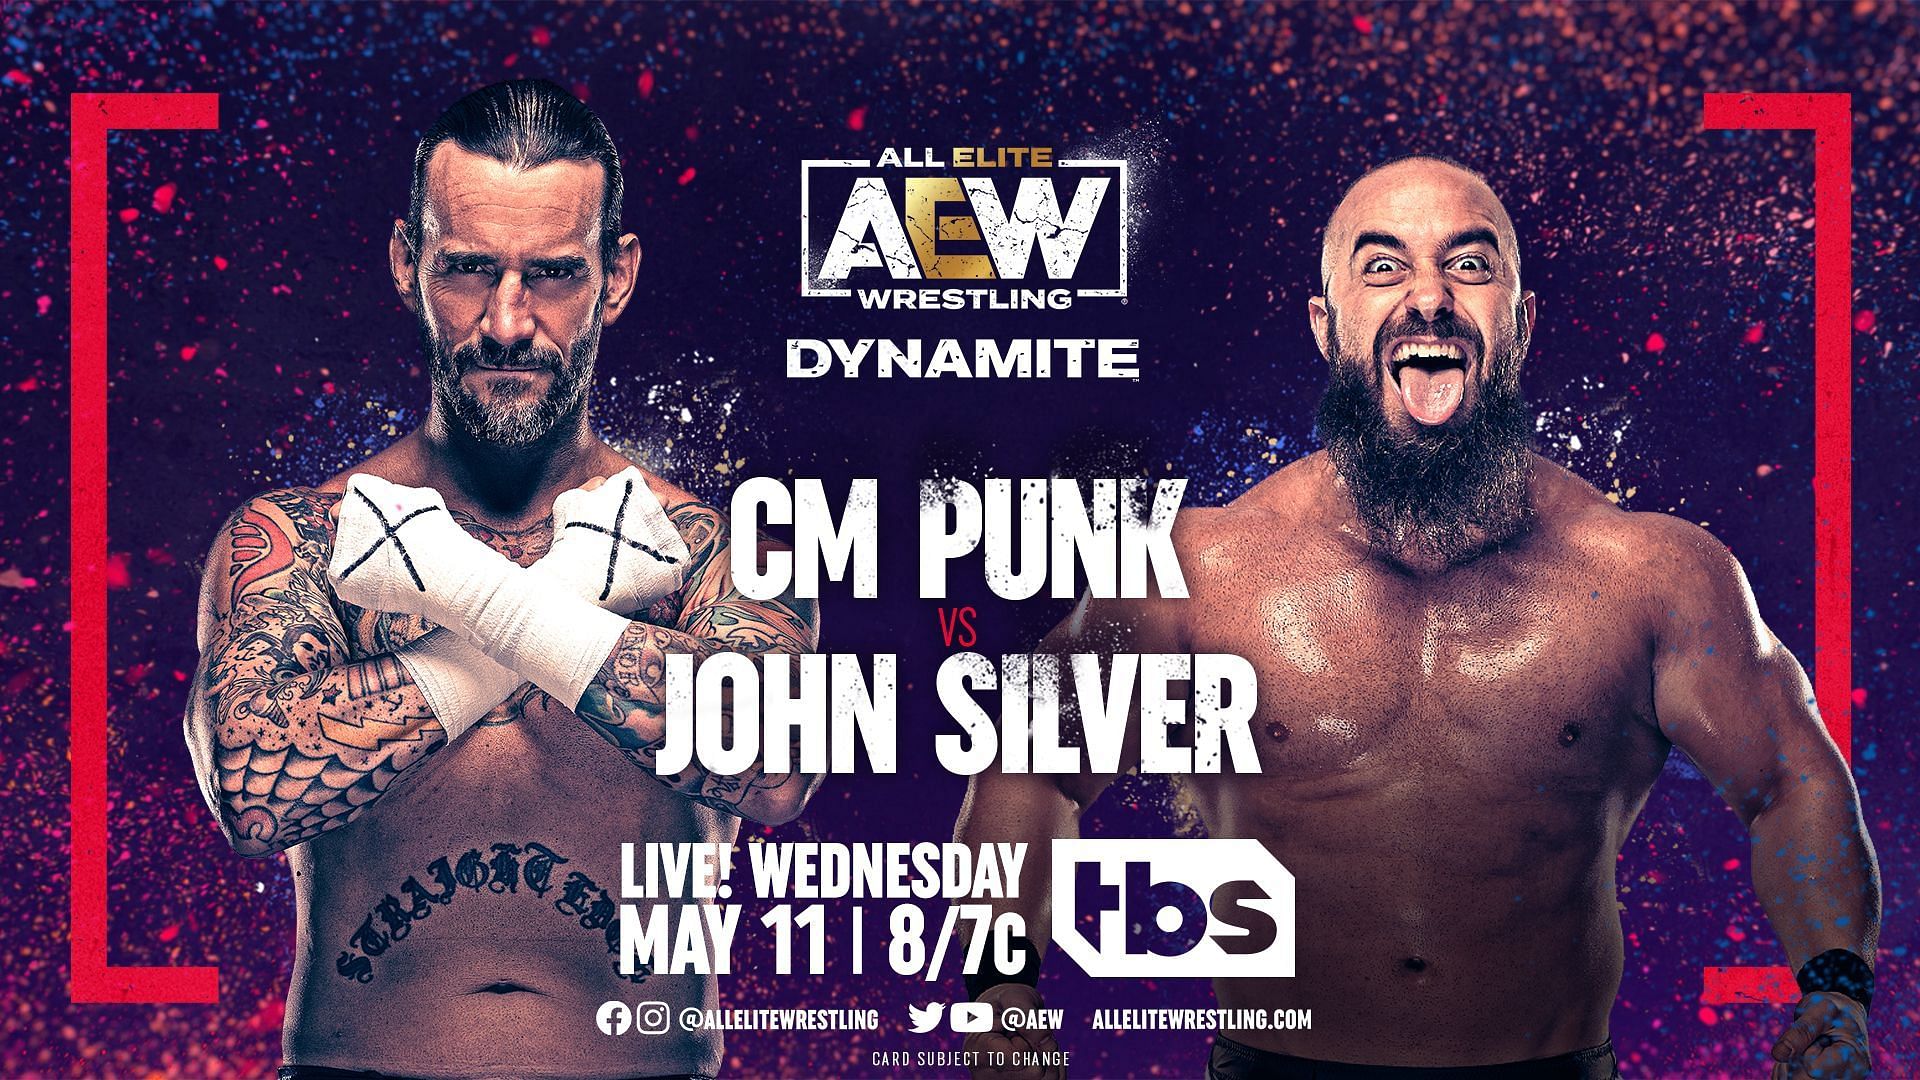 Will Silver be able to beat Punk with a hometown advantage?